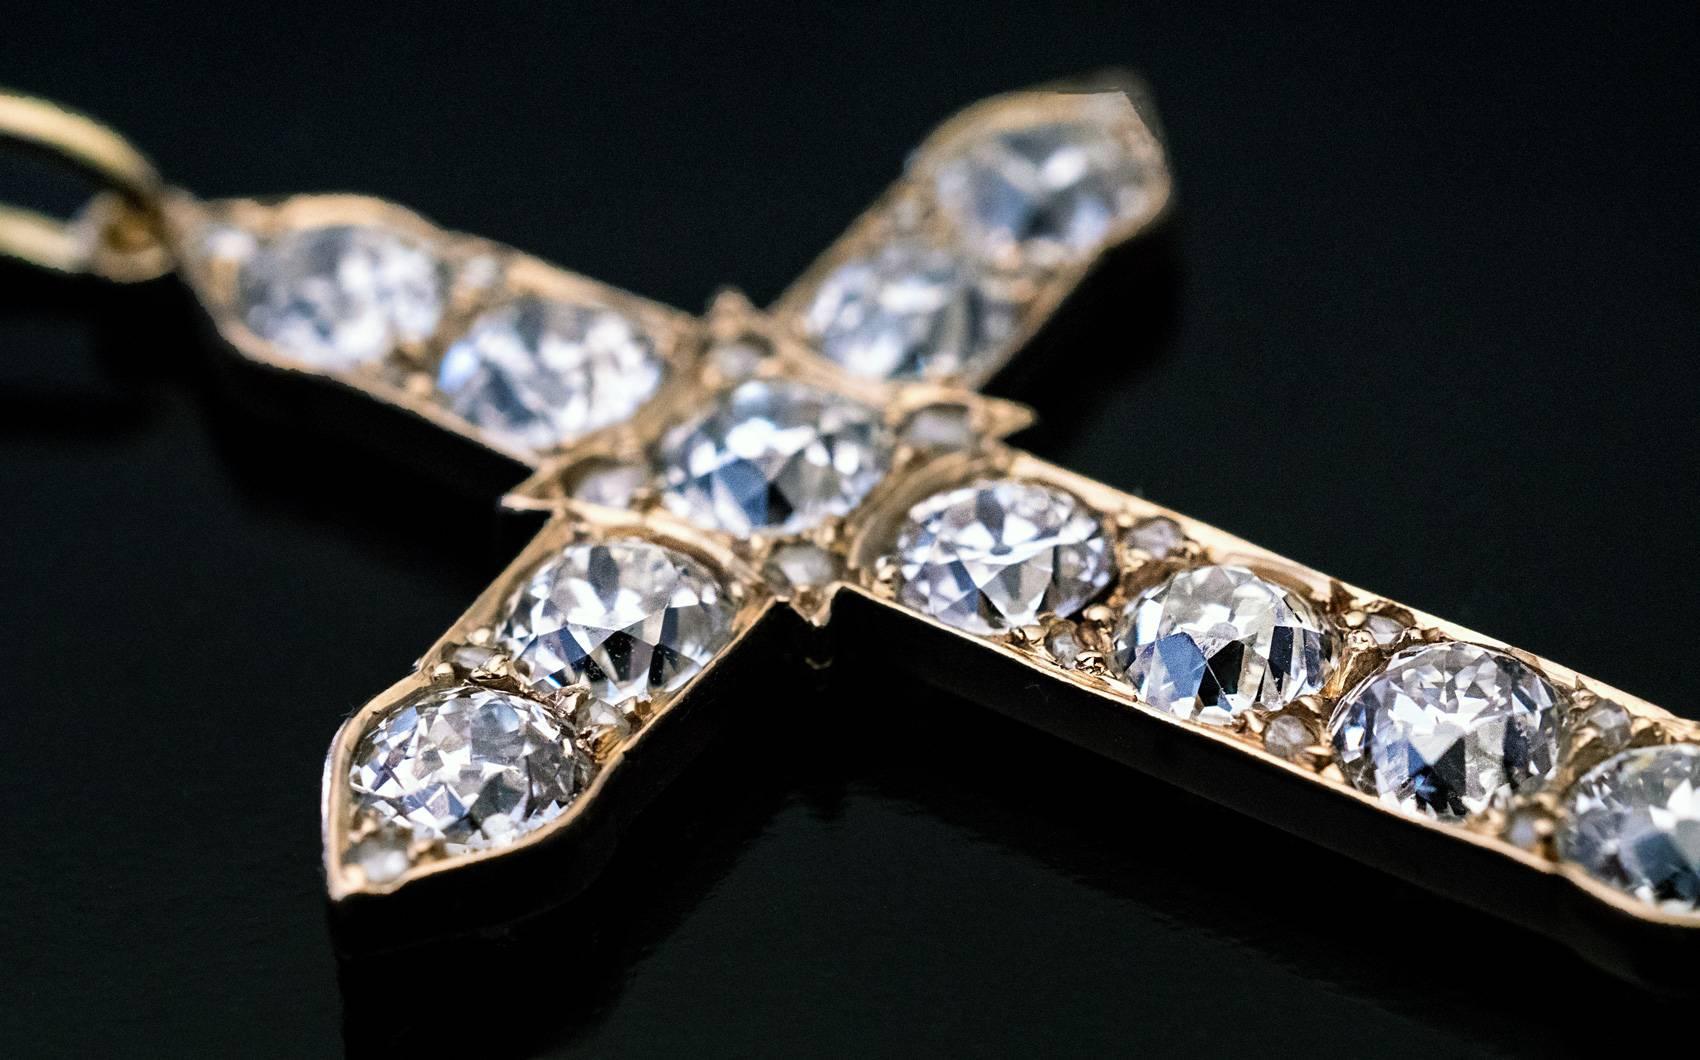 Made in St. Petersburg between 1908 and 1917
This antique 14K gold cross is set with 11 sparkling bright white old European cut diamonds of uniform color (F-G) and clarity (VS2-SI1) and is accented by 20 tiny rose cut diamonds.
The chunky old